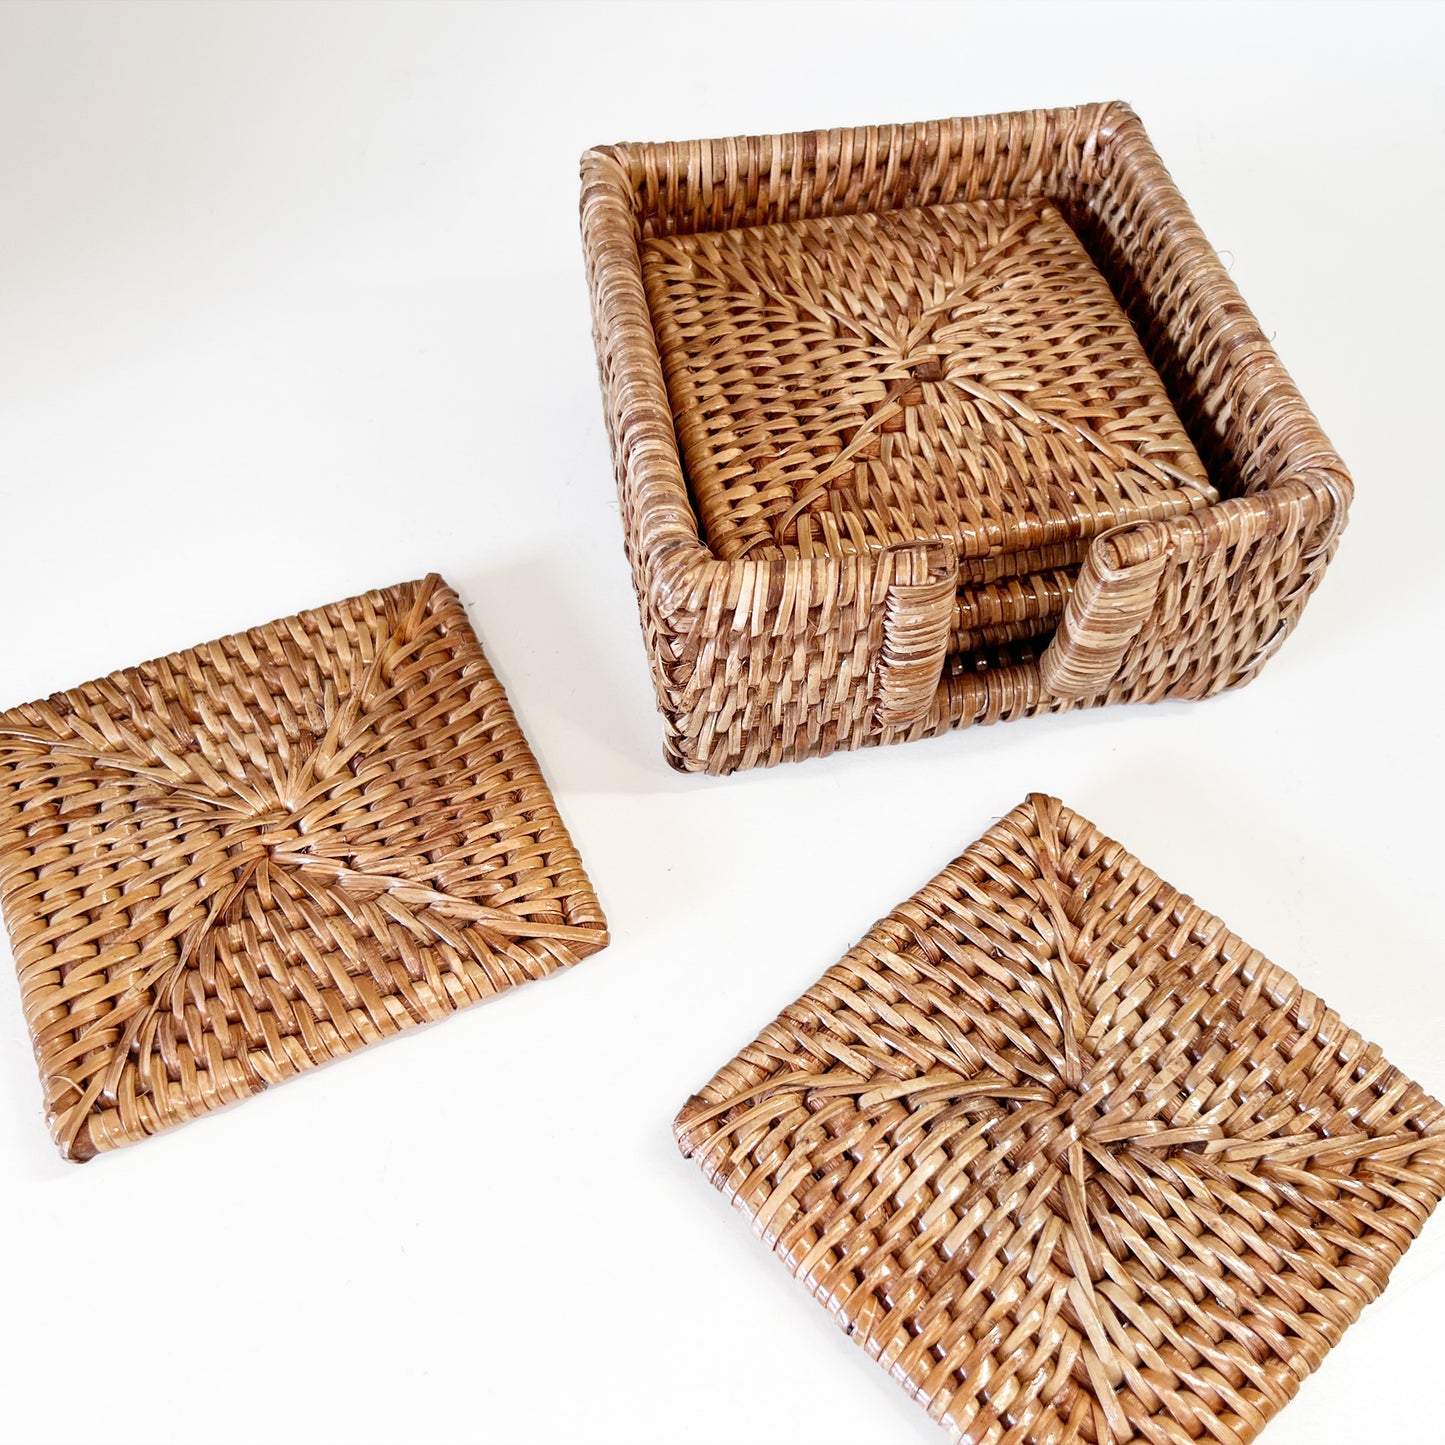 Top view of eco-friendly, handcrafted square rattan coasters in a matching holder